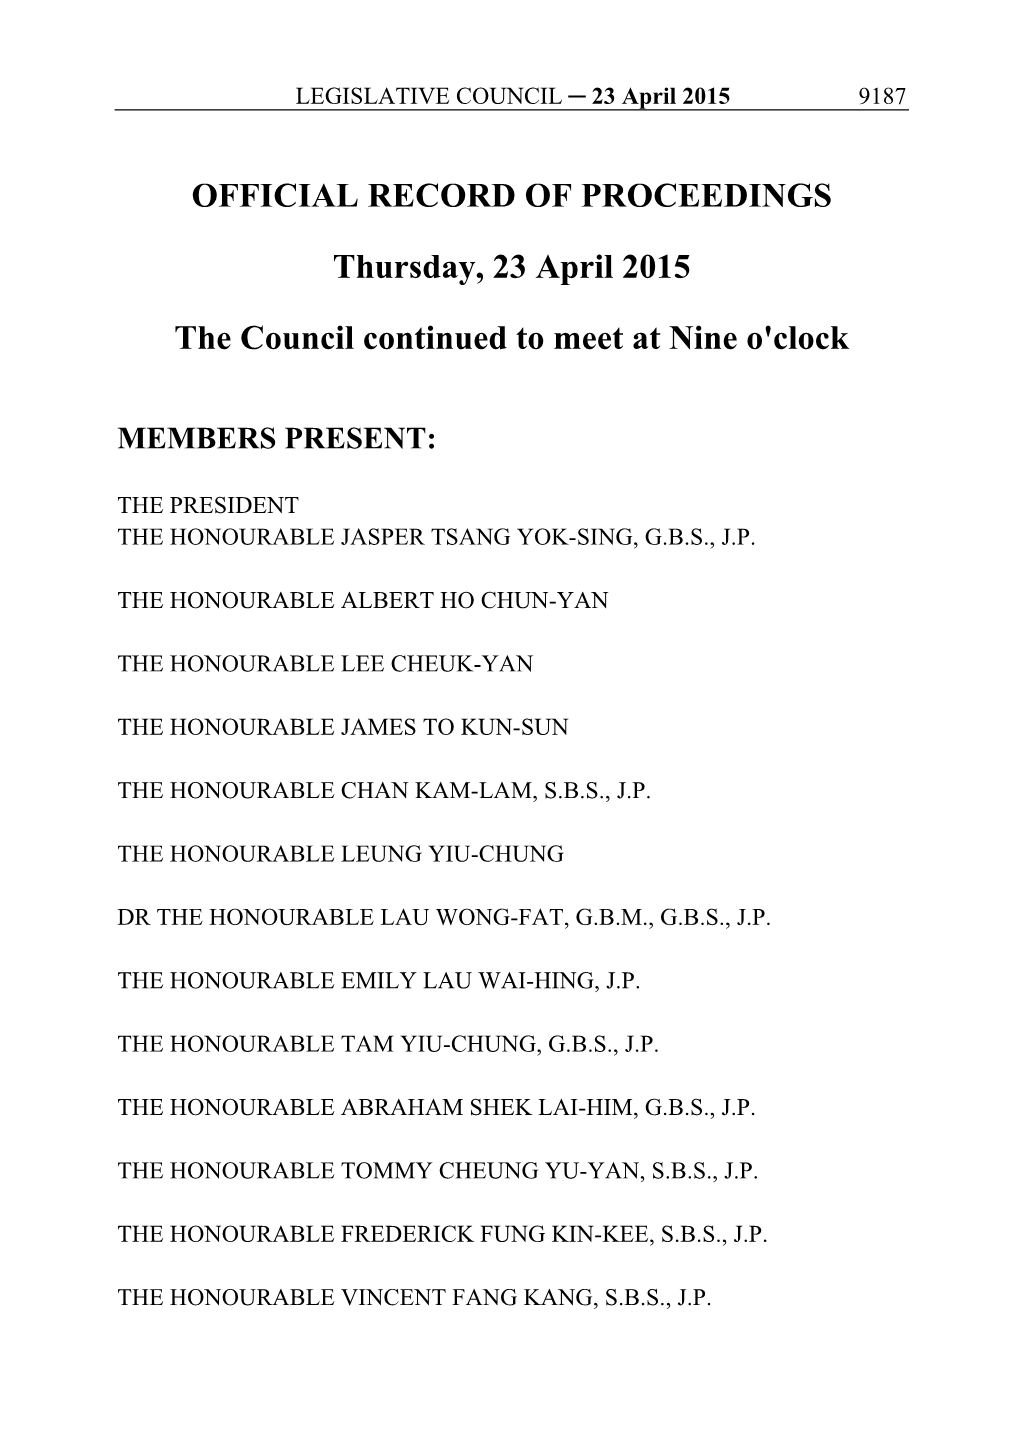 OFFICIAL RECORD of PROCEEDINGS Thursday, 23 April